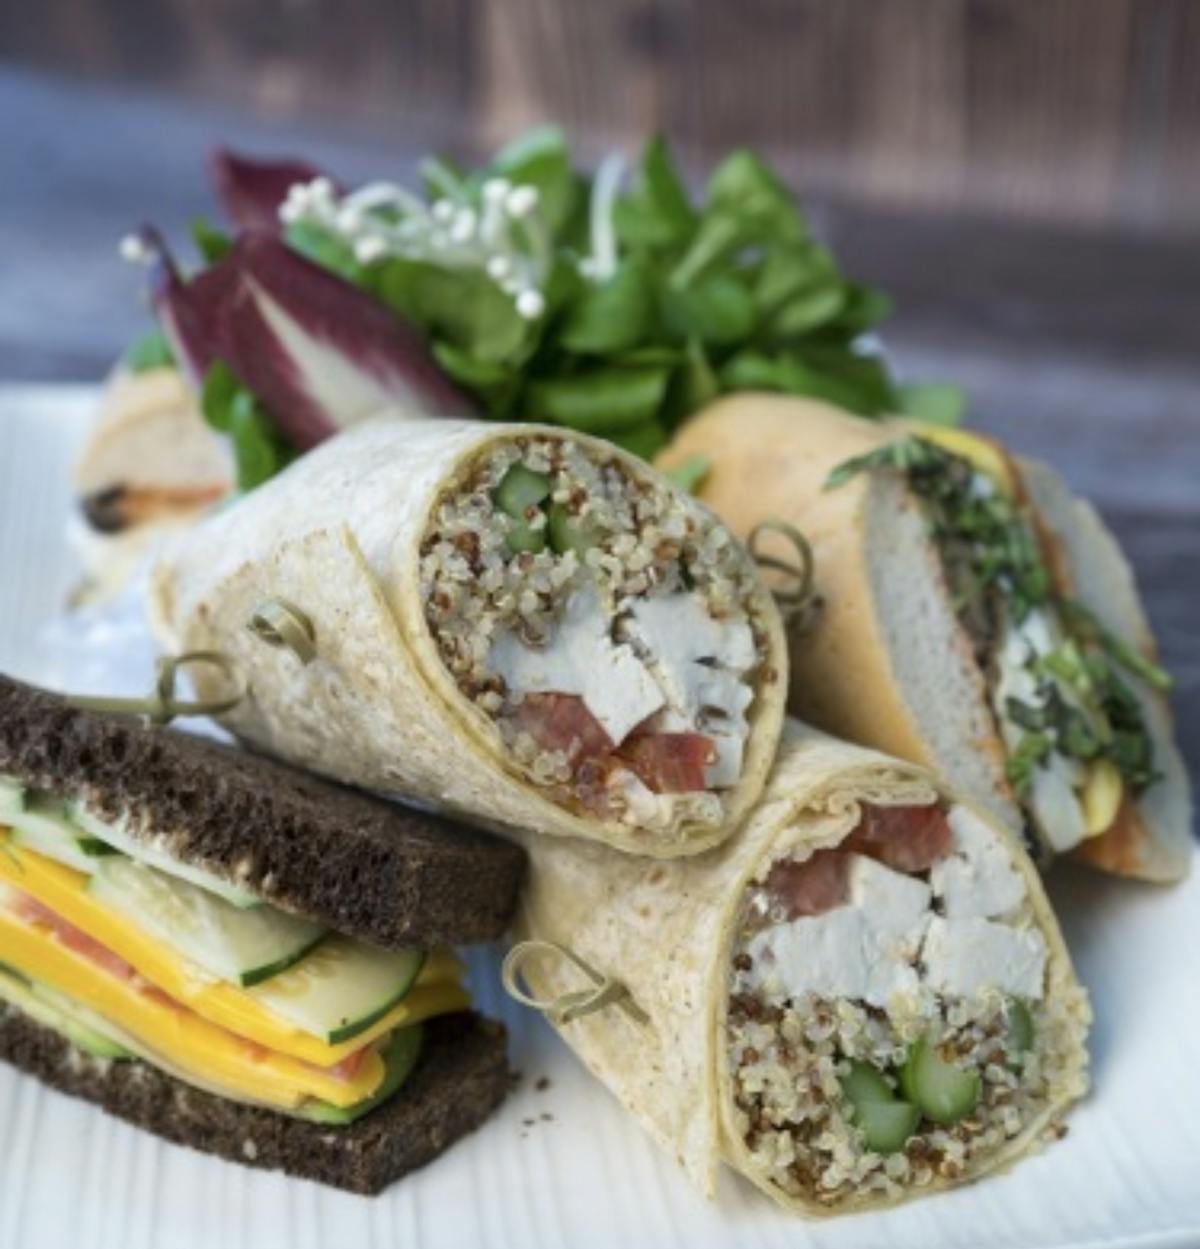 sandwiches and wraps on a plate